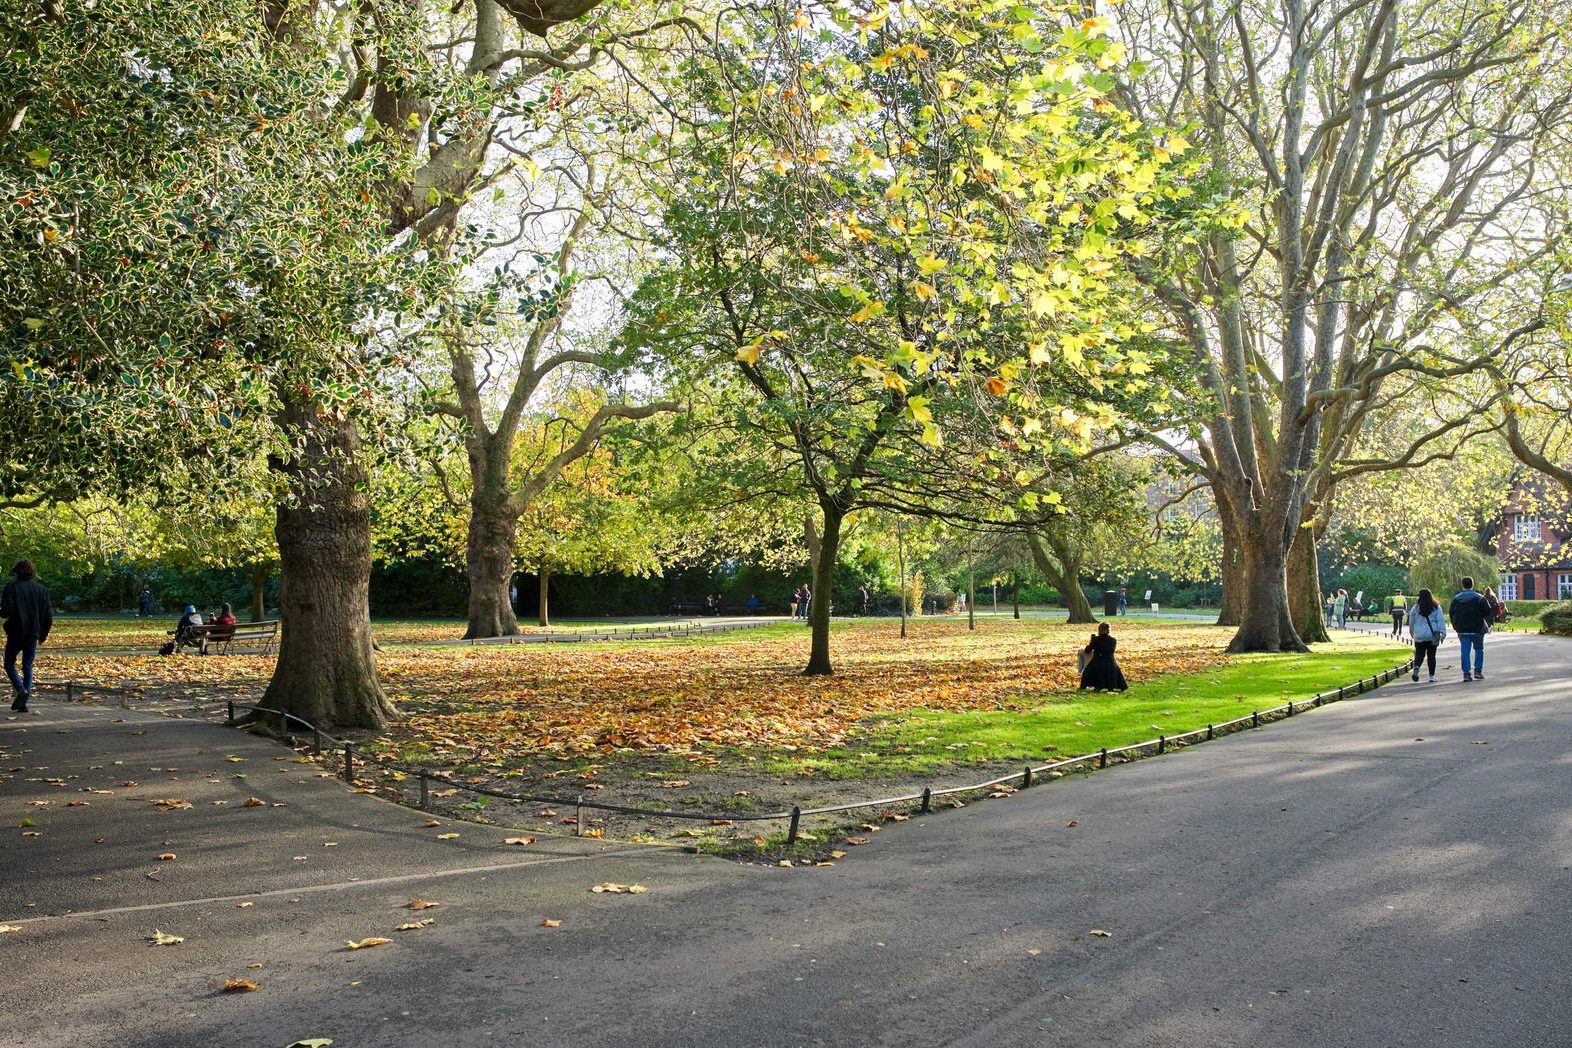 A BEAUTIFUL DAY IN STEPHEN'S GREEN [PHOTOGRAPHED 28 OCTOBER 2022 PUBLISHED 28 JUNE 2023] 005